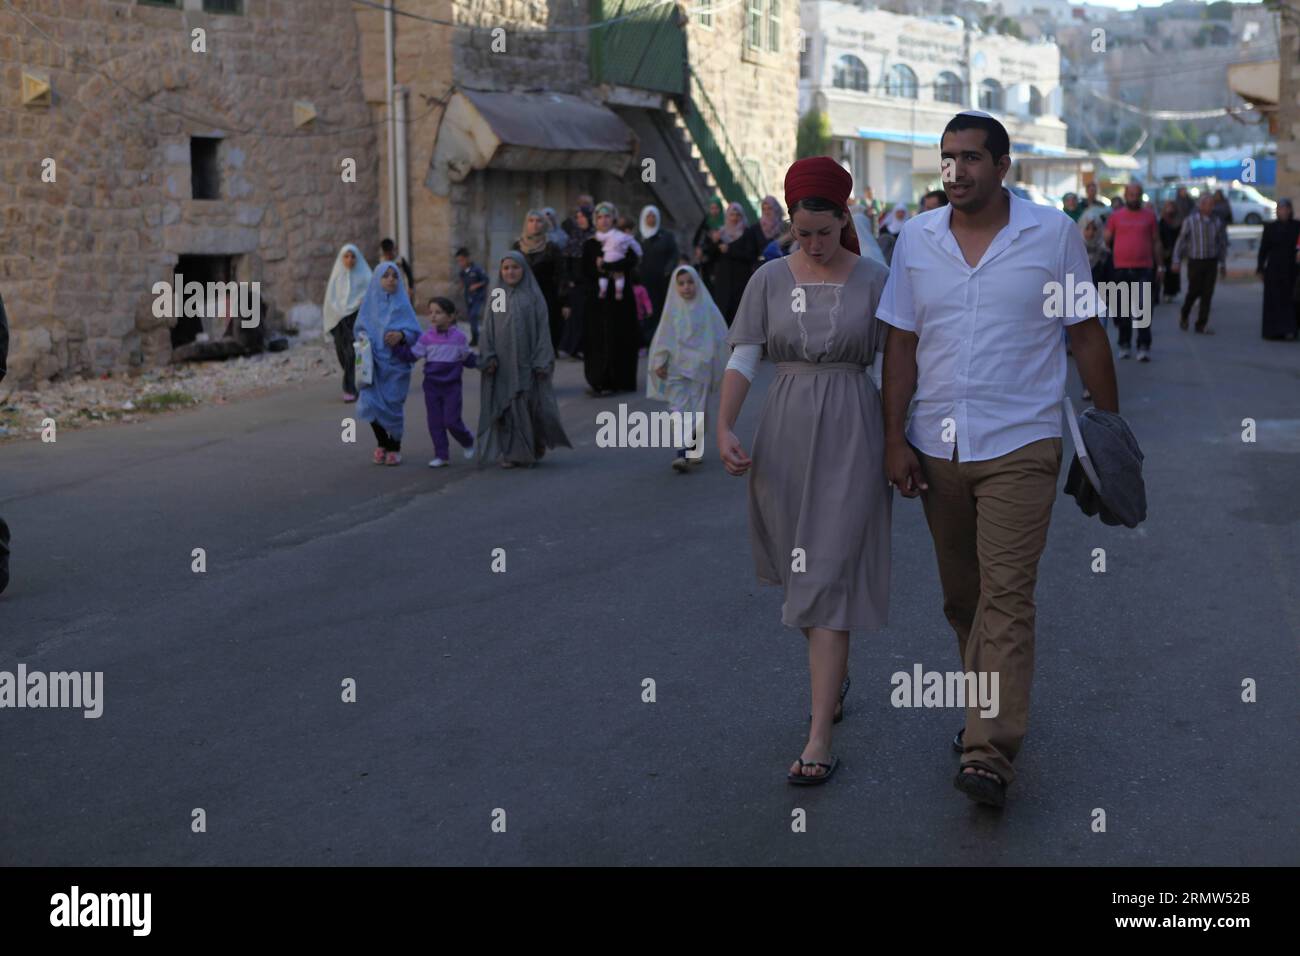 (141004) -- HEBRON, Oct. 4, 2014 -- Jewish worshipers walk near the al-Ibrahimi mosque, a religious site to Muslims, in the West Bank City of Hebron on Oct. 4, 2014. The Jewish fast of Yom Kippur is coinciding with the Muslim festival of Eid al-Adha for the first time in three decades. The concurrence of the holy days has not occurred for 33 years because the two faiths use different lunar calendars. ) MIDEAST-HEBRON-JEWISH-MUSLIMS MamounxWazwaz PUBLICATIONxNOTxINxCHN   Hebron OCT 4 2014 Jewish Worshiper Walk Near The Al Ibrahimi Mosque a Religious Site to Muslims in The WEST Bank City of Hebr Stock Photo